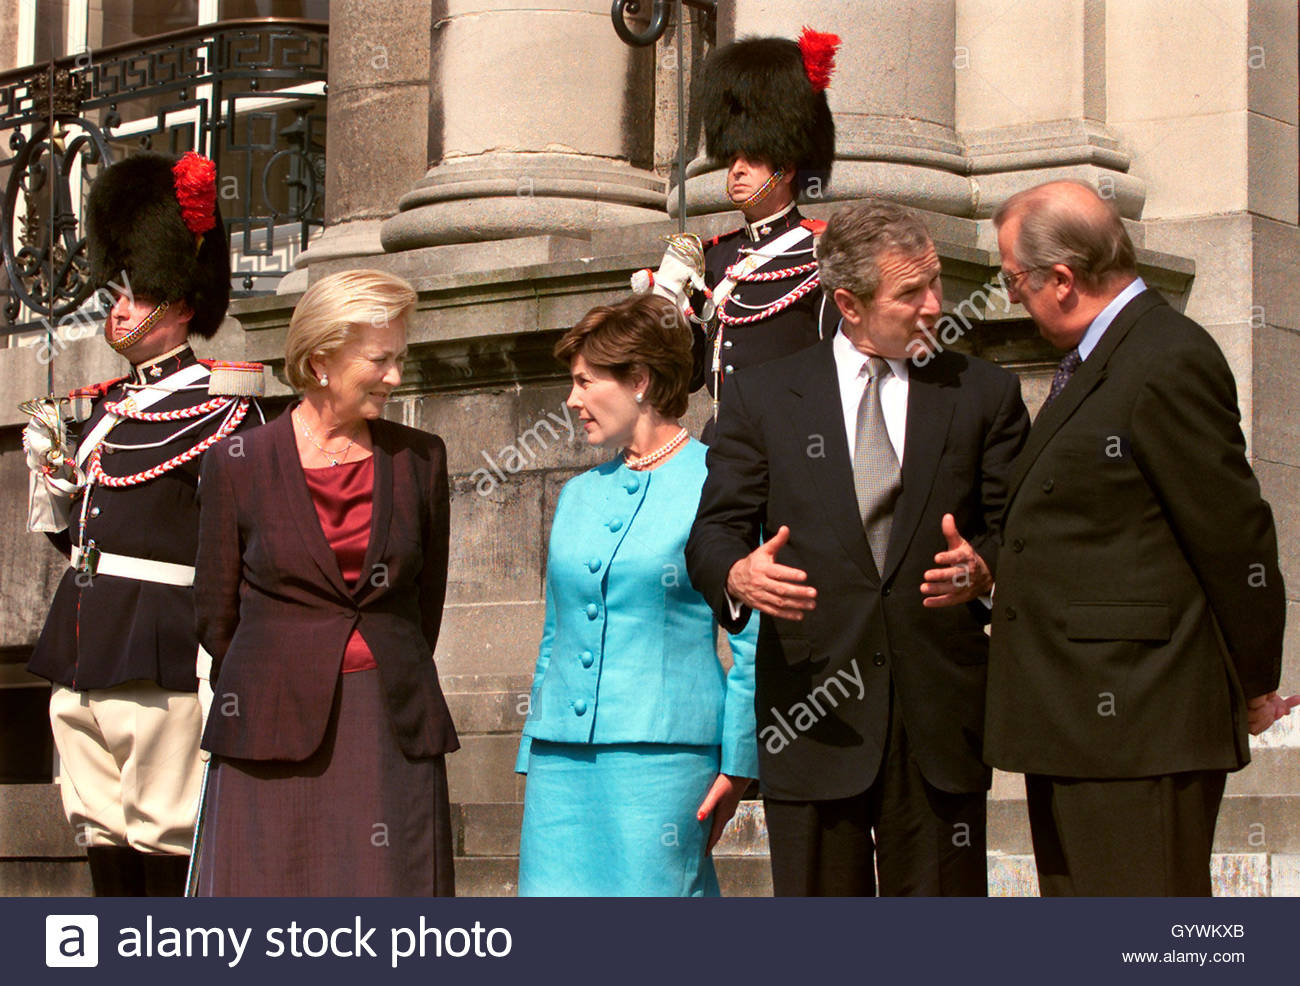 queen-paola-of-belgium-l-and-us-first-lady-laura-bush-chat-together-GYWKXB.jpg